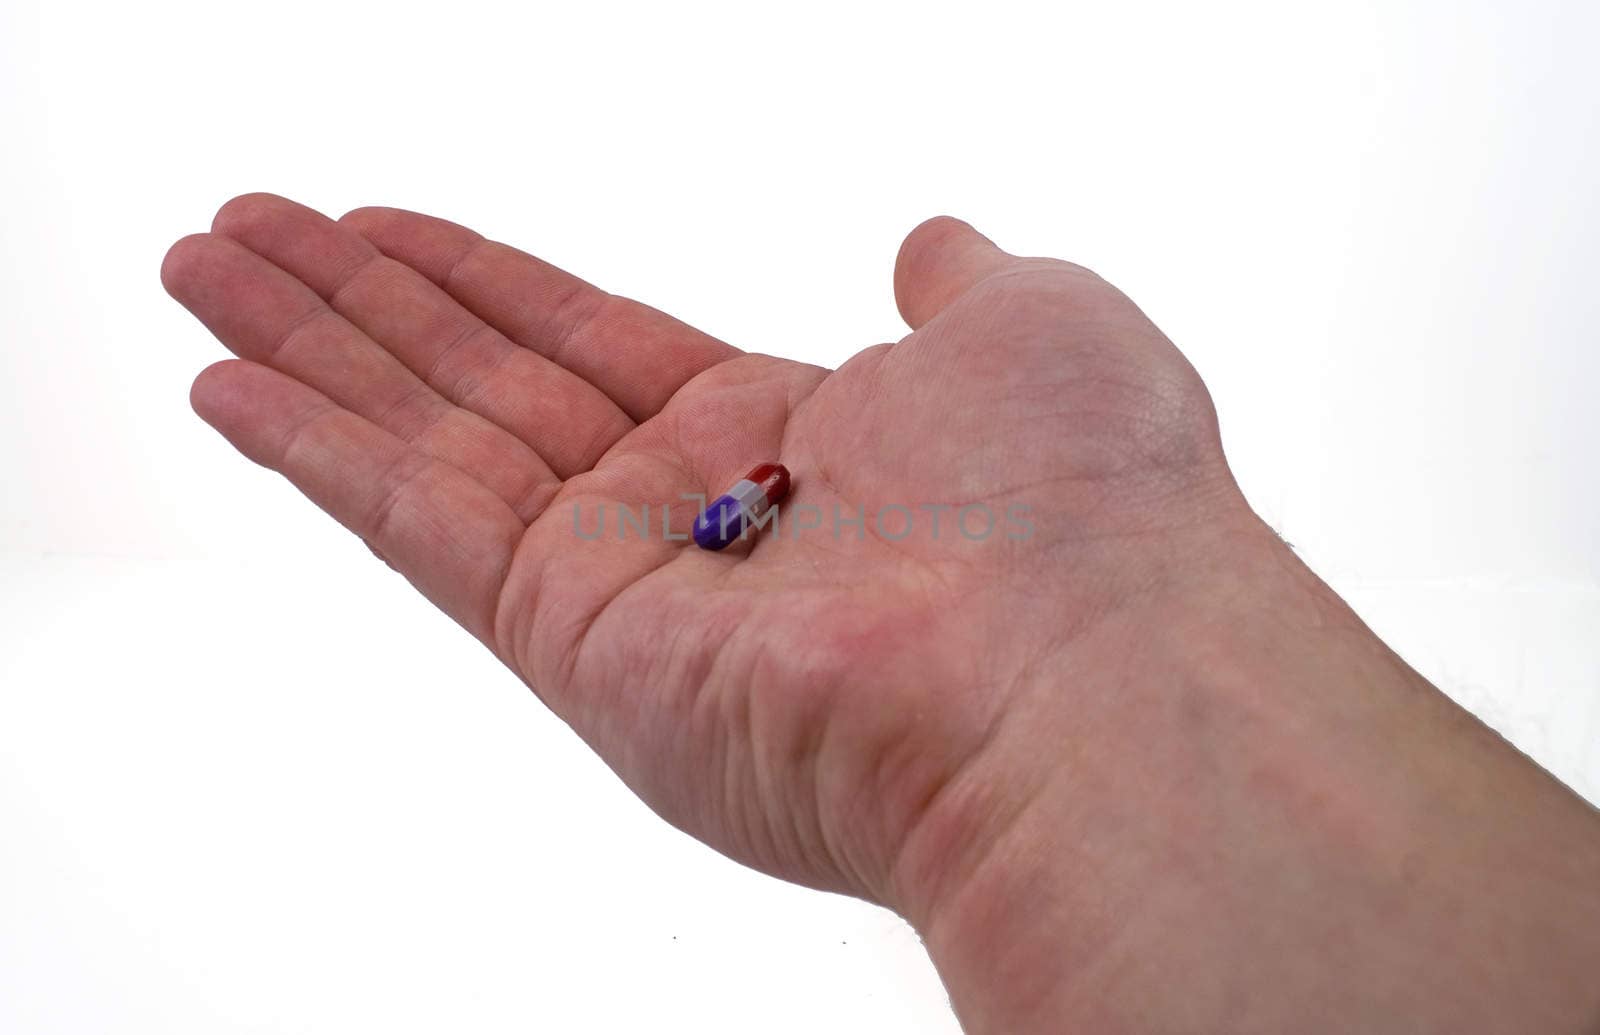 A single purple and red pill in the palm of a white man's hand against a white background.